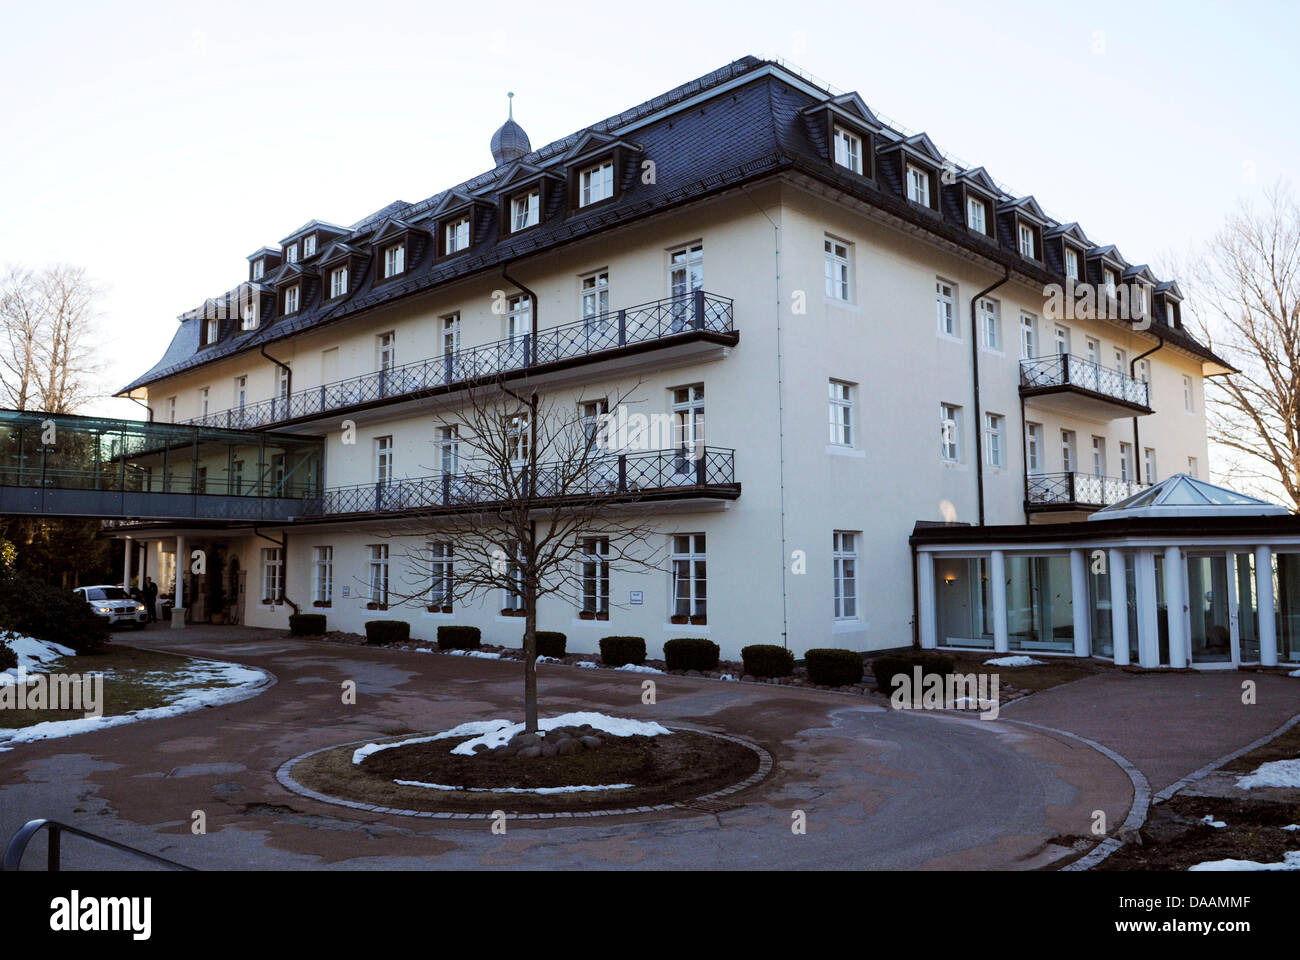 The Max Grundig Clinic in Buehl, Germany, 07 February 2011. It is speculated that embattled Egyptian President Husni Mubarak might visit the Clinic for a 'prolonged check-up' while negotiations for a new government take place in Cairo. Photo: MARCUS GERNSBECK Stock Photo